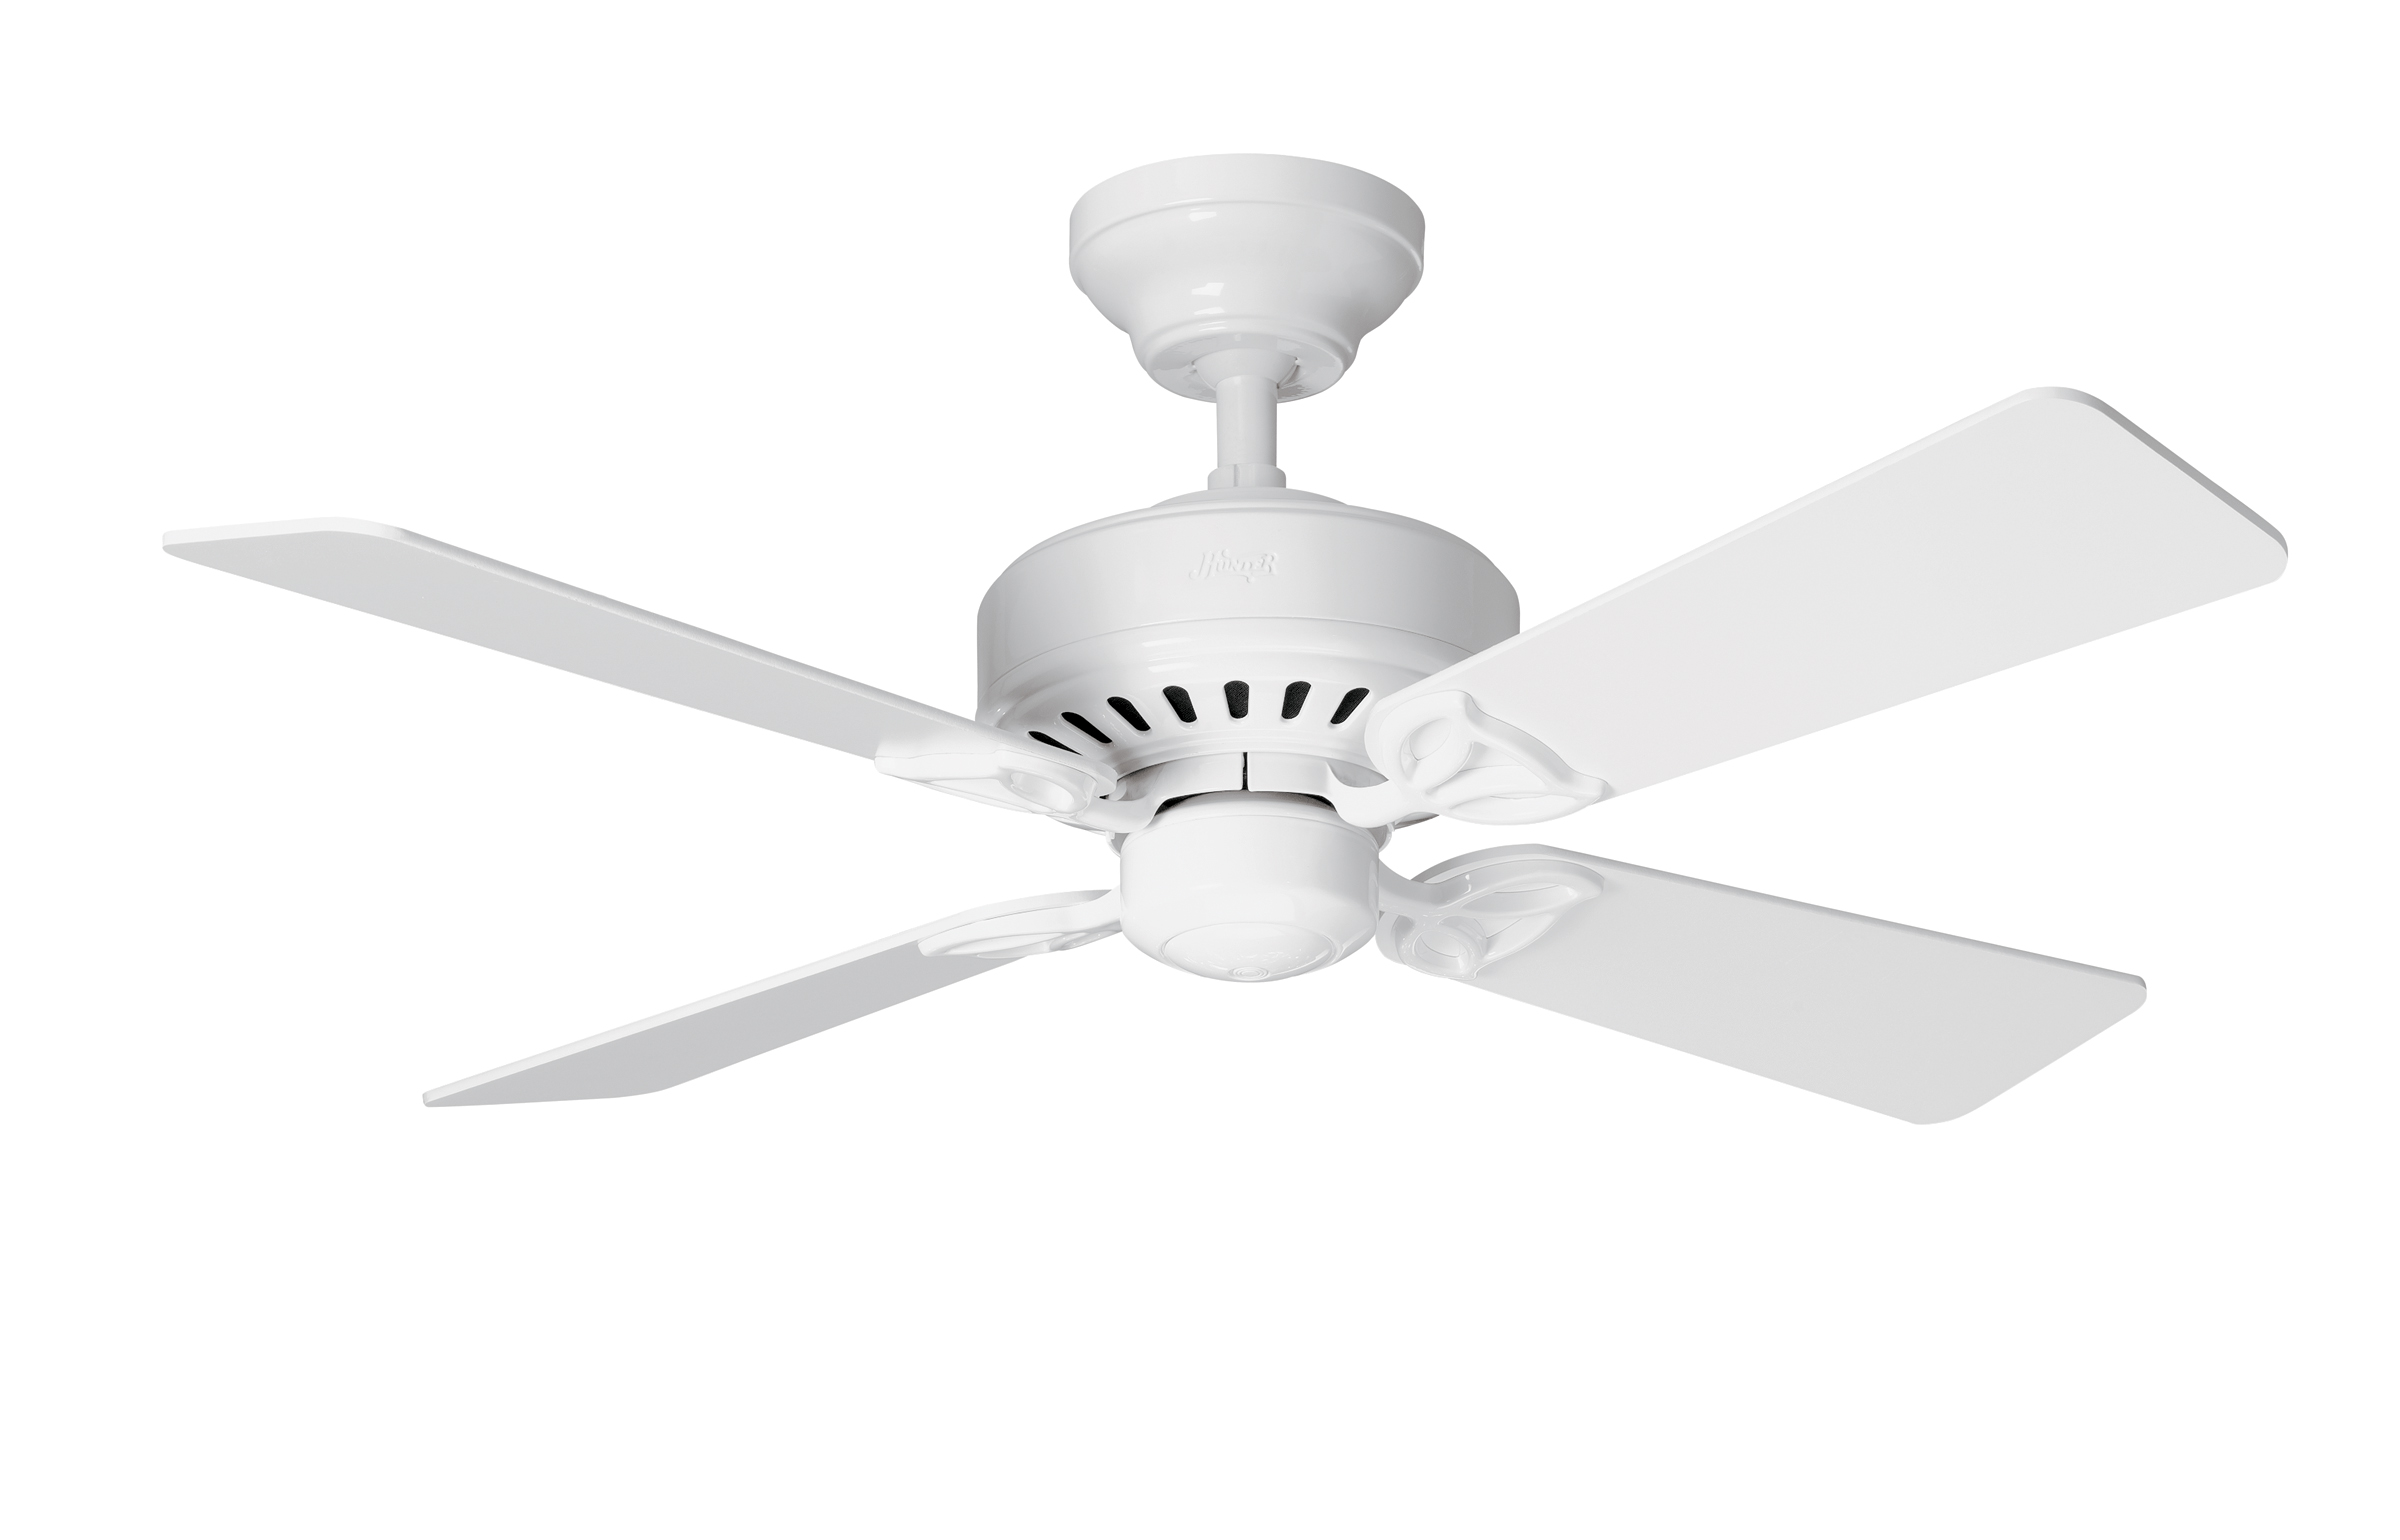 Hunter ceiling fans was one of the best decisions